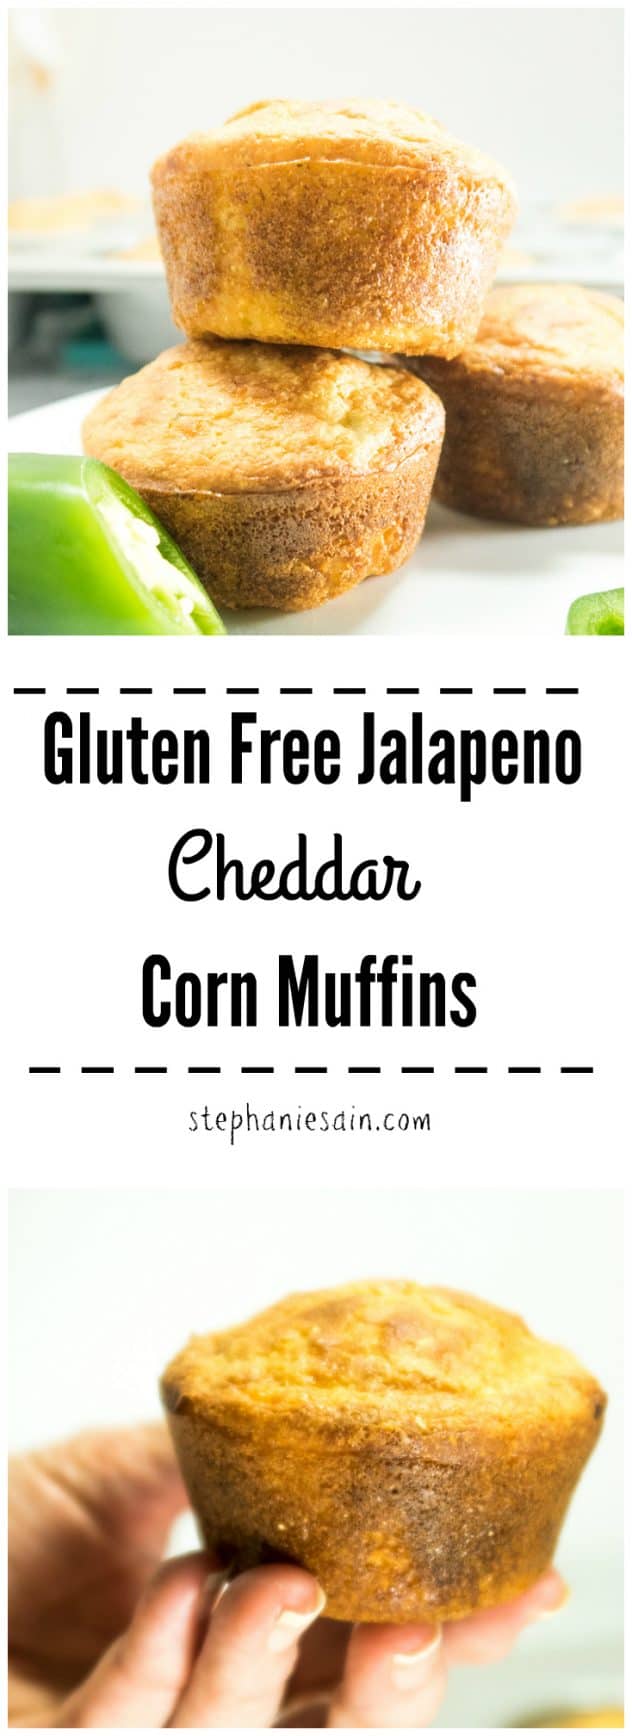 Gluten Free Jalapeno Cheddar Corn Muffins are a great addition with soups, stews, & chili. Also make a perfect snack that packs well for lunches.